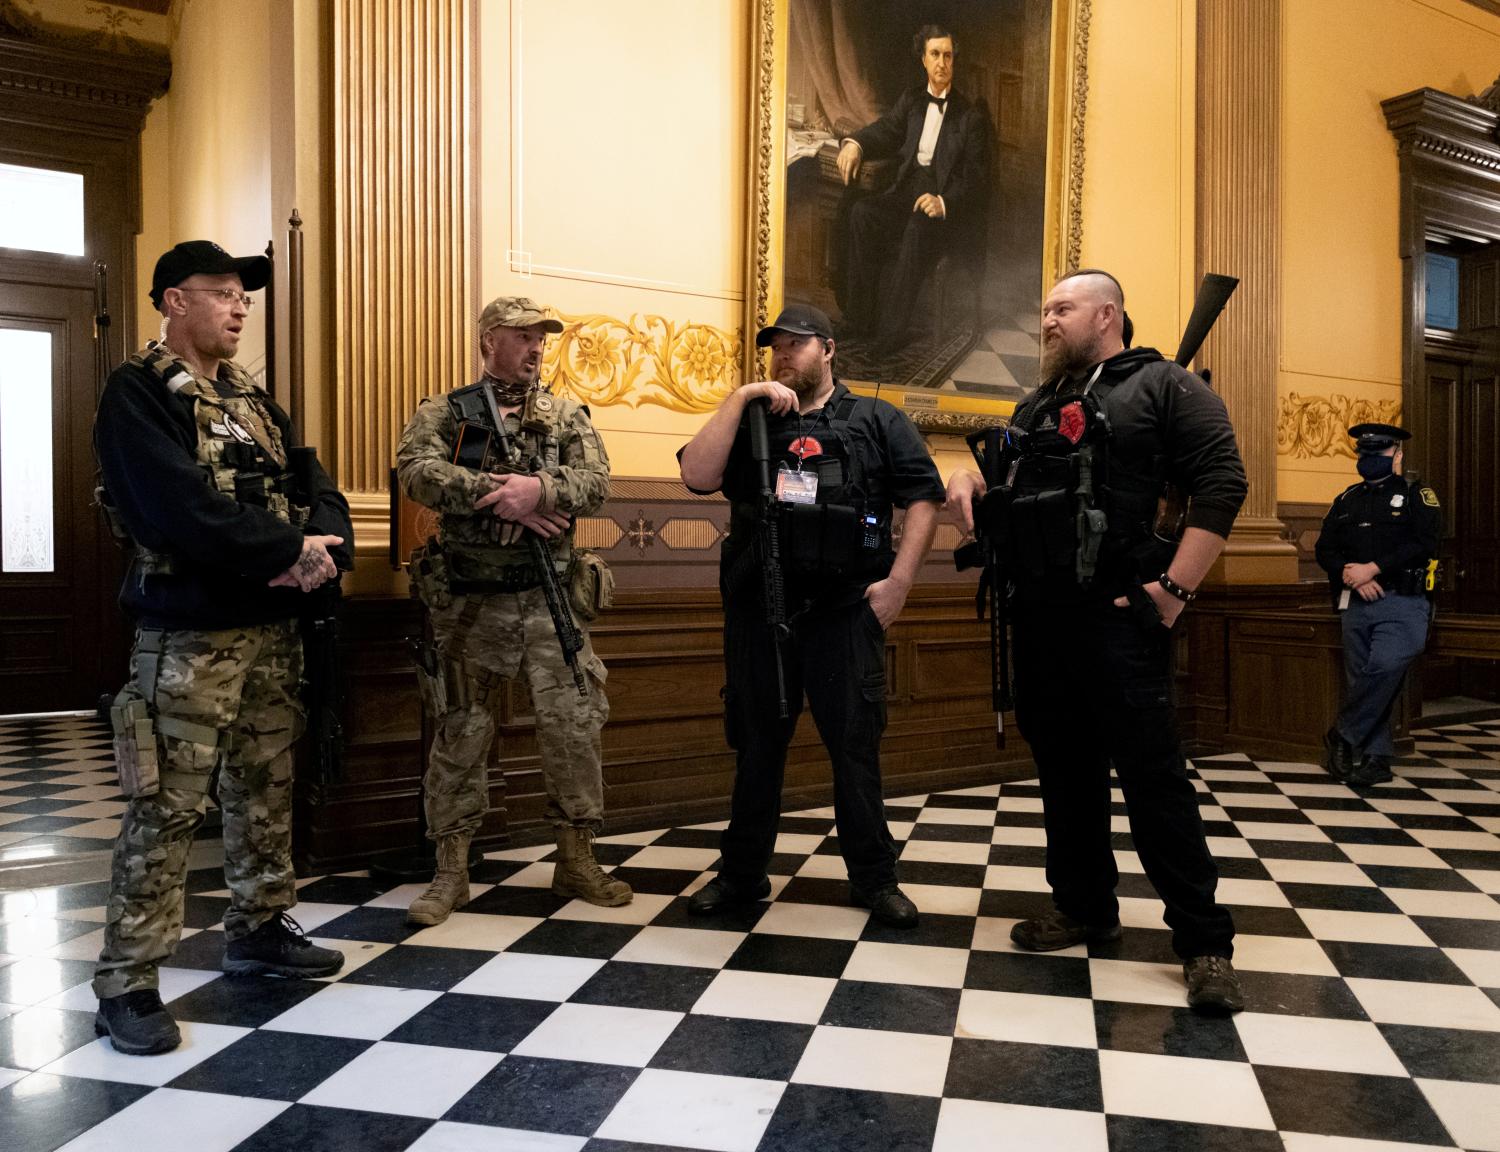 FILE PHOTO: Members of a militia group, including Michael John Null and Willam Grant Null (R) who were charged October 8, 2020 for their involvement in a plot to kidnap the Michigan governor, attack the state capitol building and incite violence, stand near the doors to the chamber in the capitol building before the vote on the extension of Governor Gretchen Whitmer's emergency declaration/stay-at-home order due to the coronavirus disease (COVID-19) outbreak, in Lansing, Michigan, U.S. April 30, 2020.  REUTERS/Seth Herald/File Photo